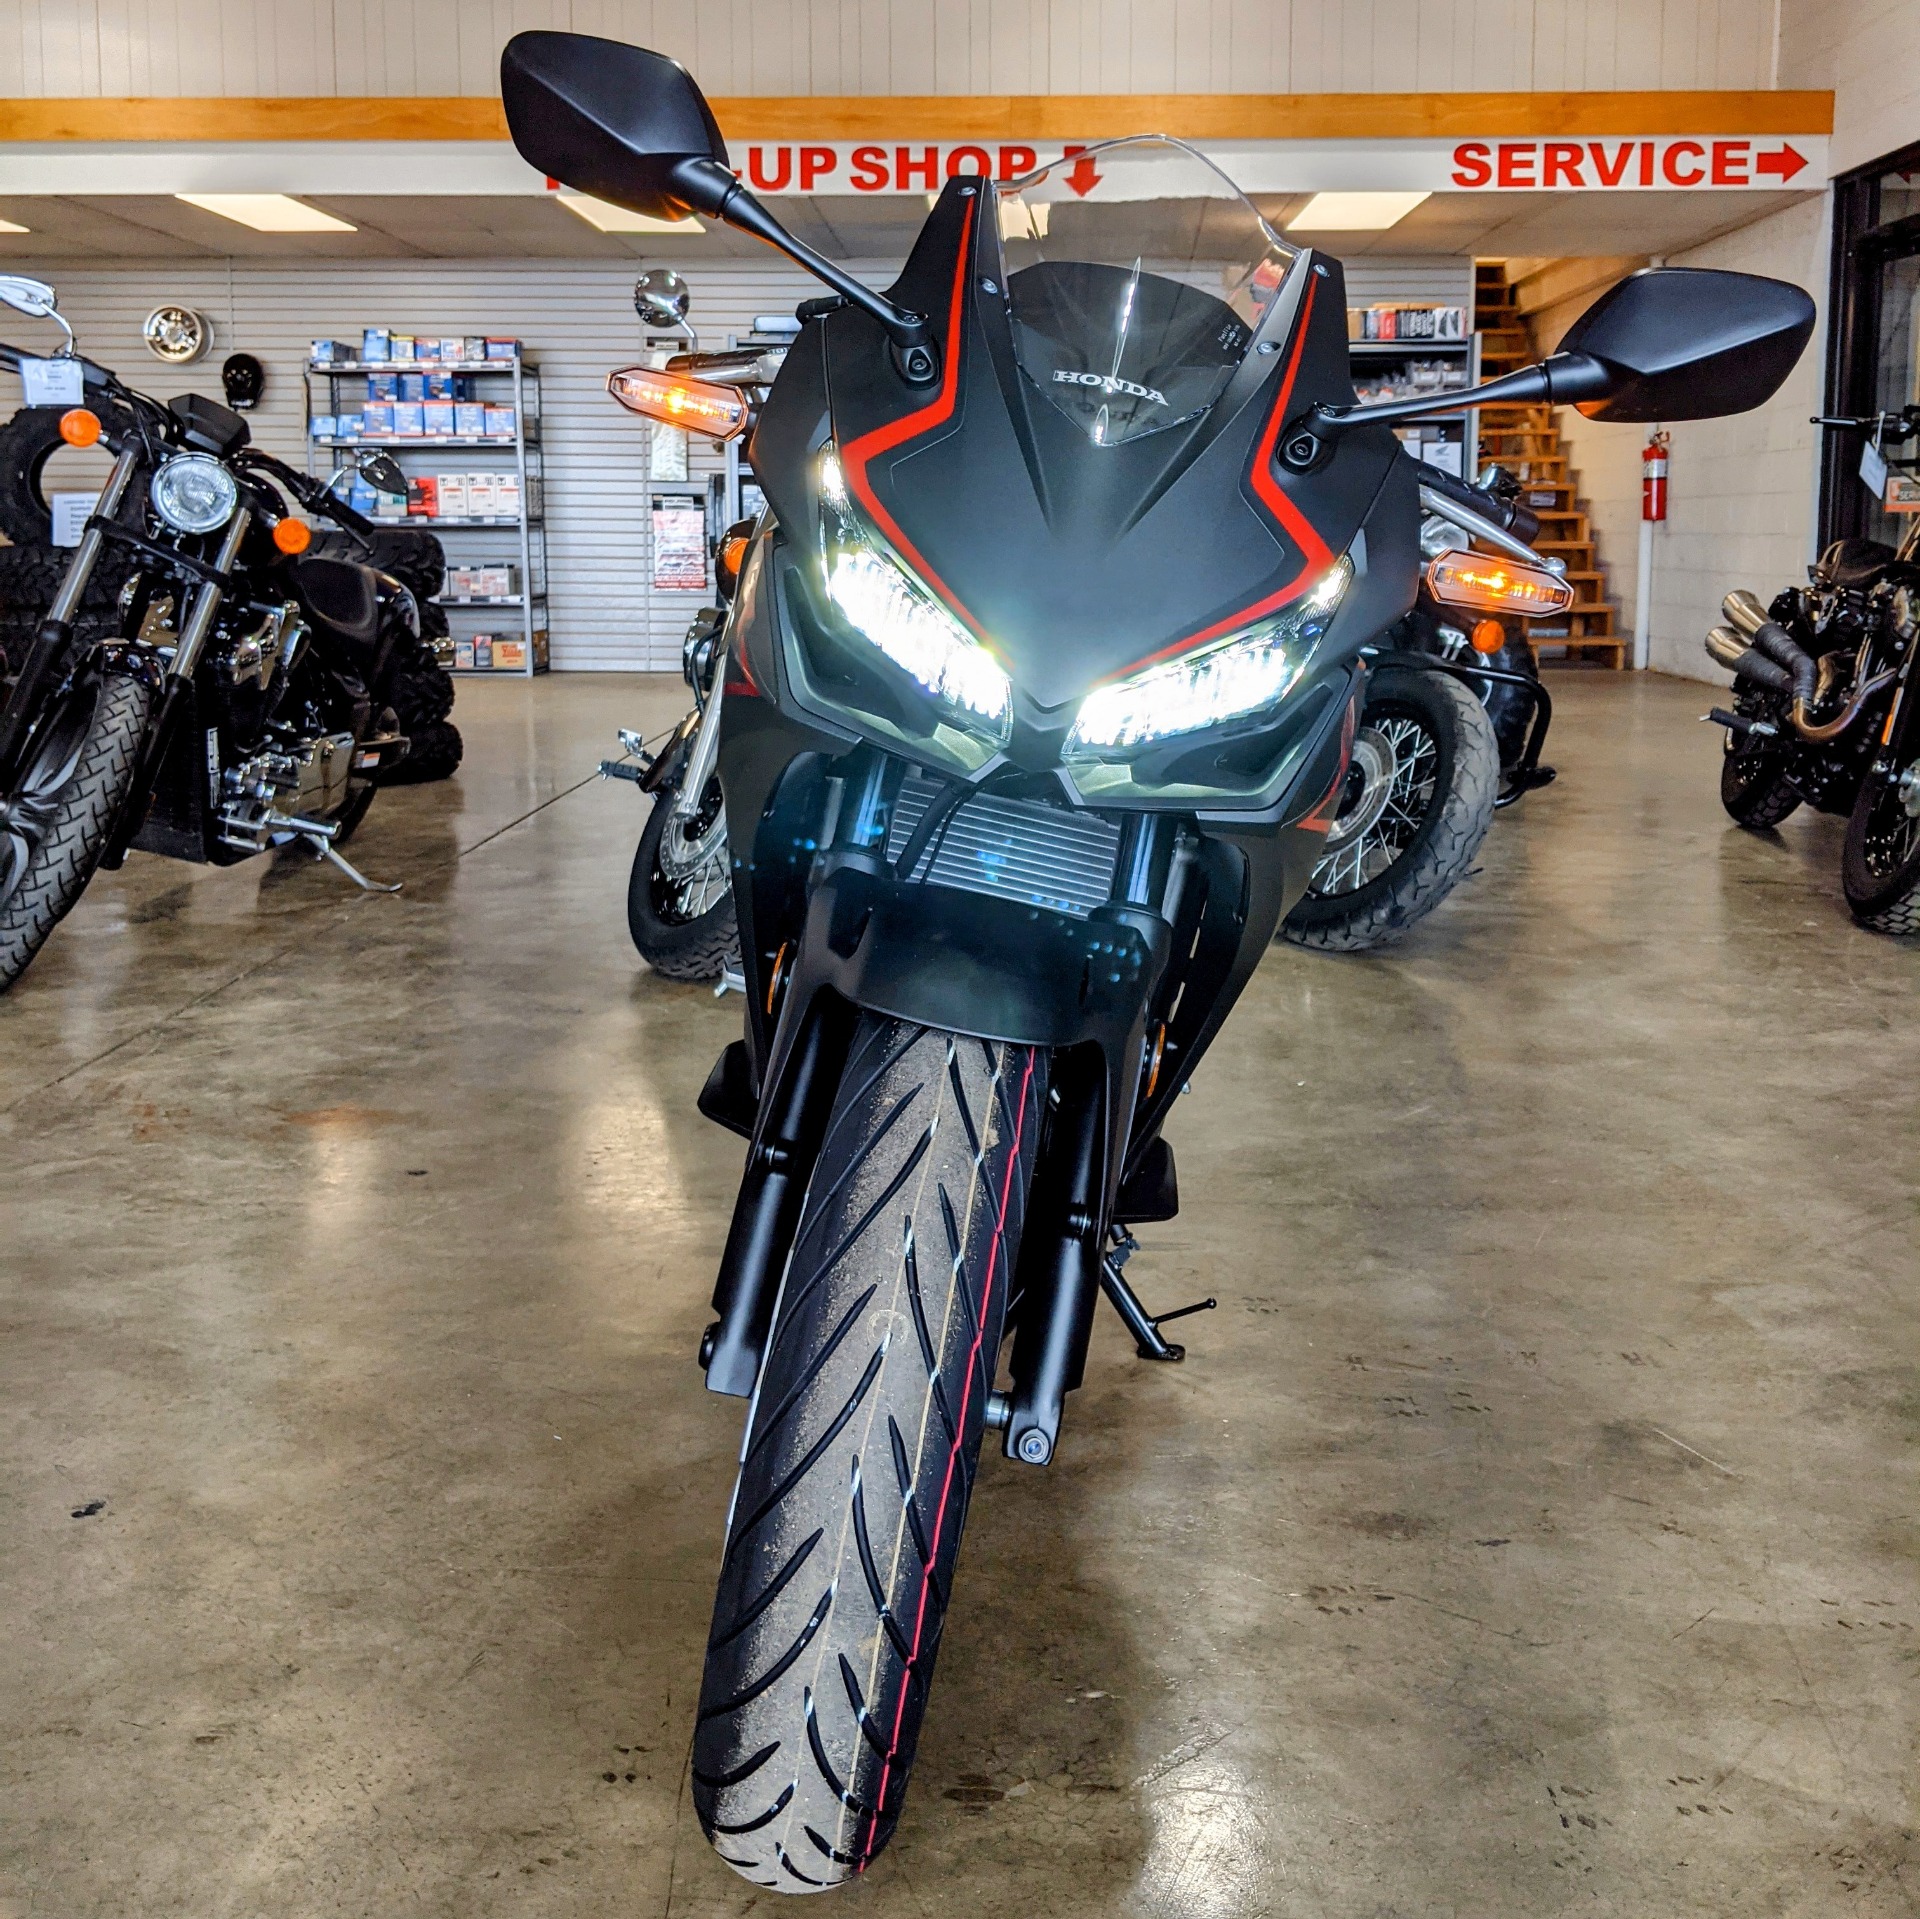 2021 Honda CBR500R ABS in Winchester, Tennessee - Photo 3